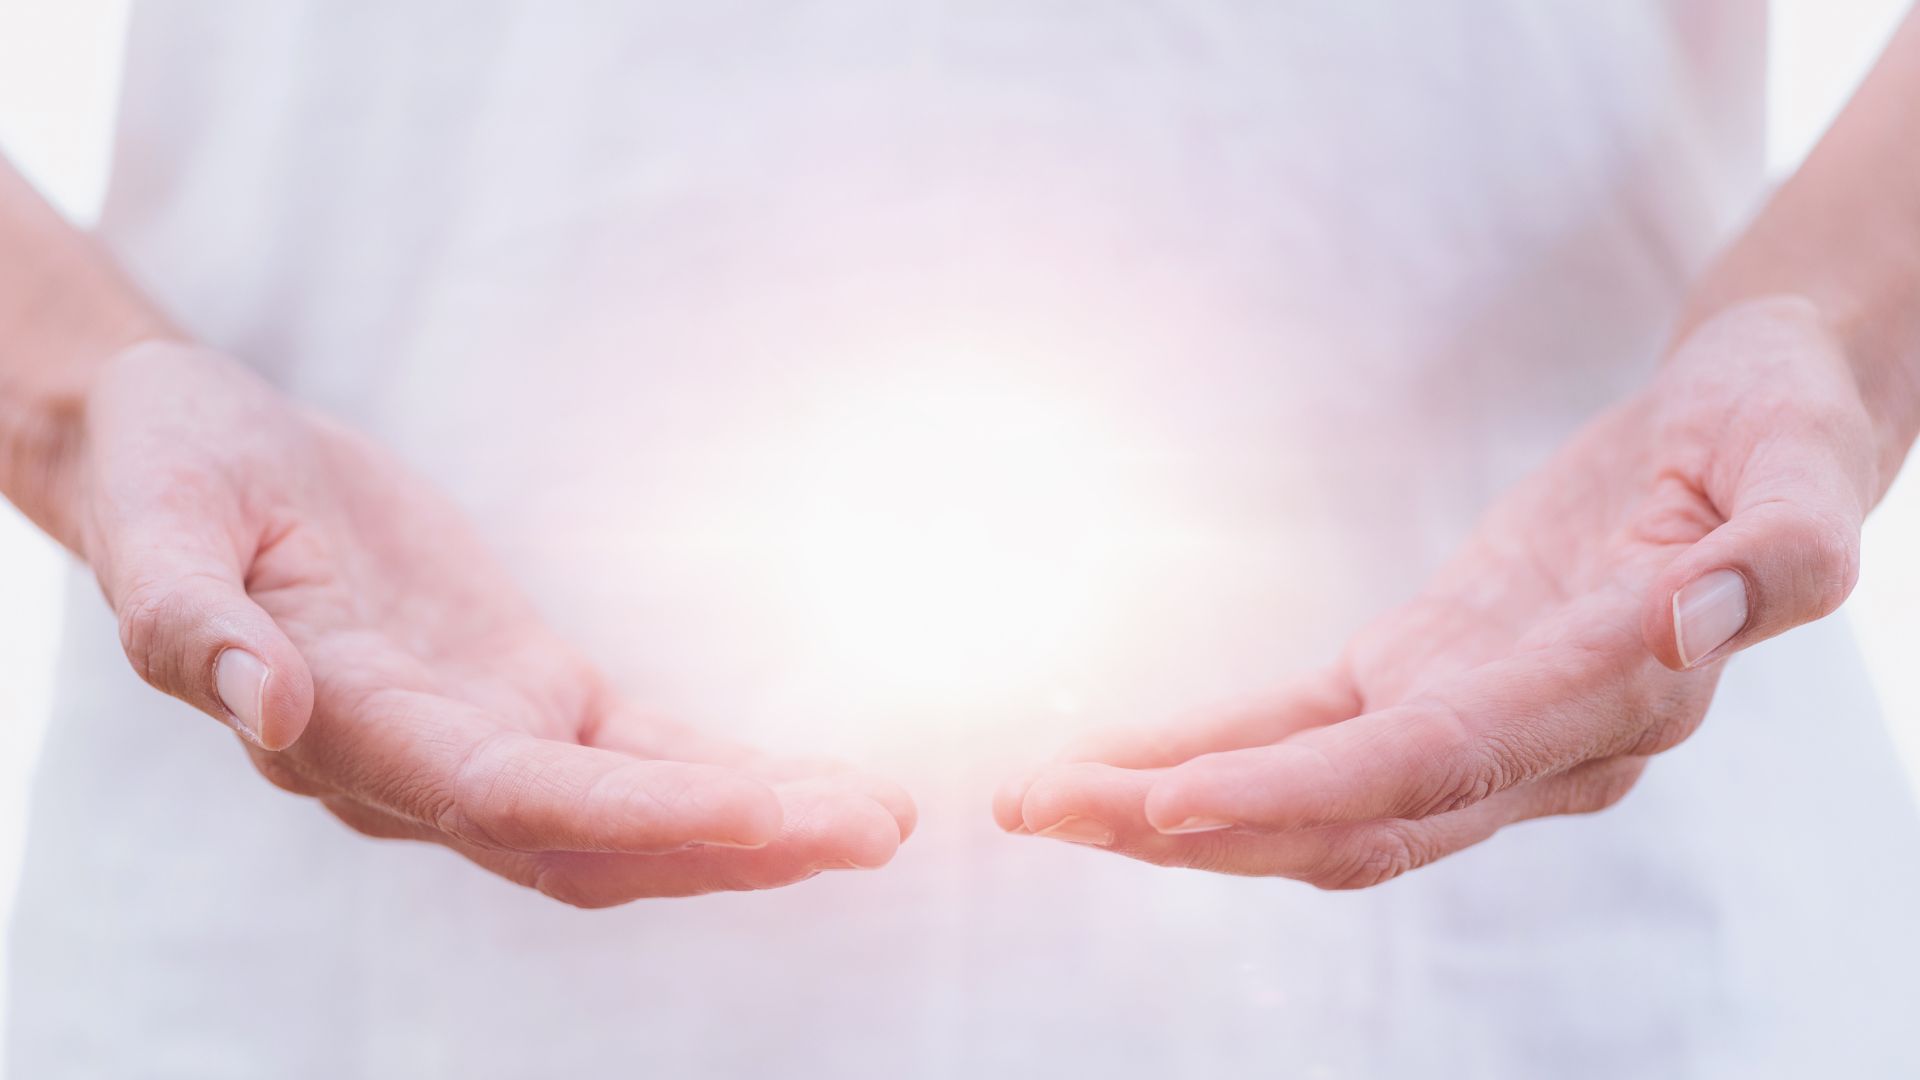 A ball of light glows between the hands of a woman in a white gown